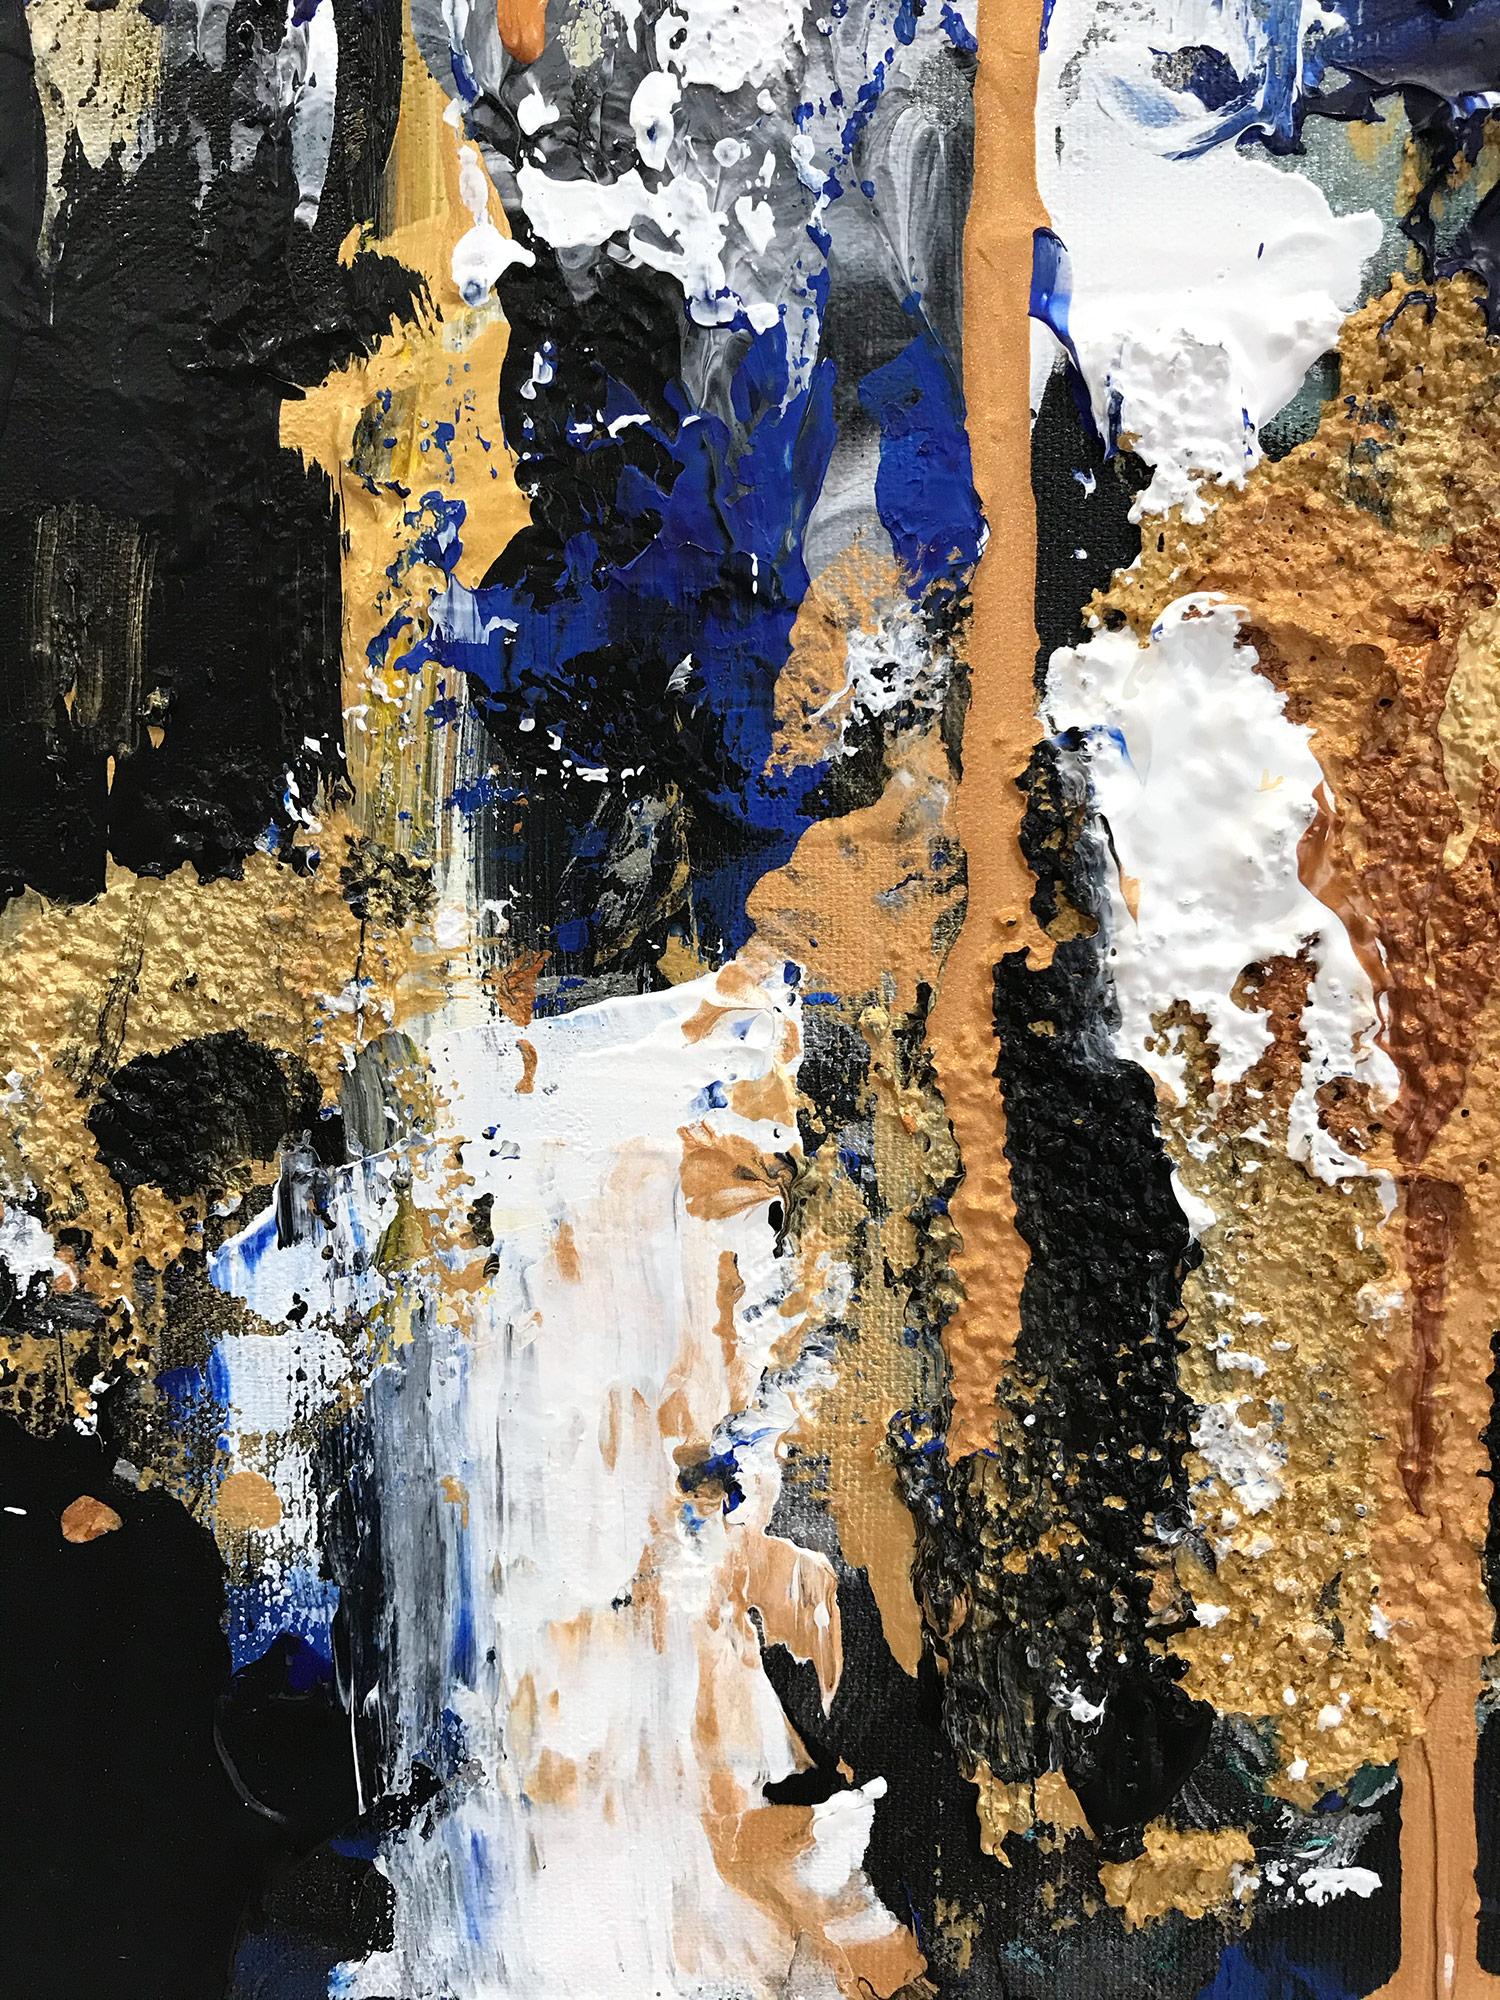 With layers of bright oils and whisking brush strokes, the paint is able to shine and shimmer in a very unique pattern. The artist uses gold drips, mixed media and acrylics to add a very contemporary, Urban feel. The way the paint blends and washes